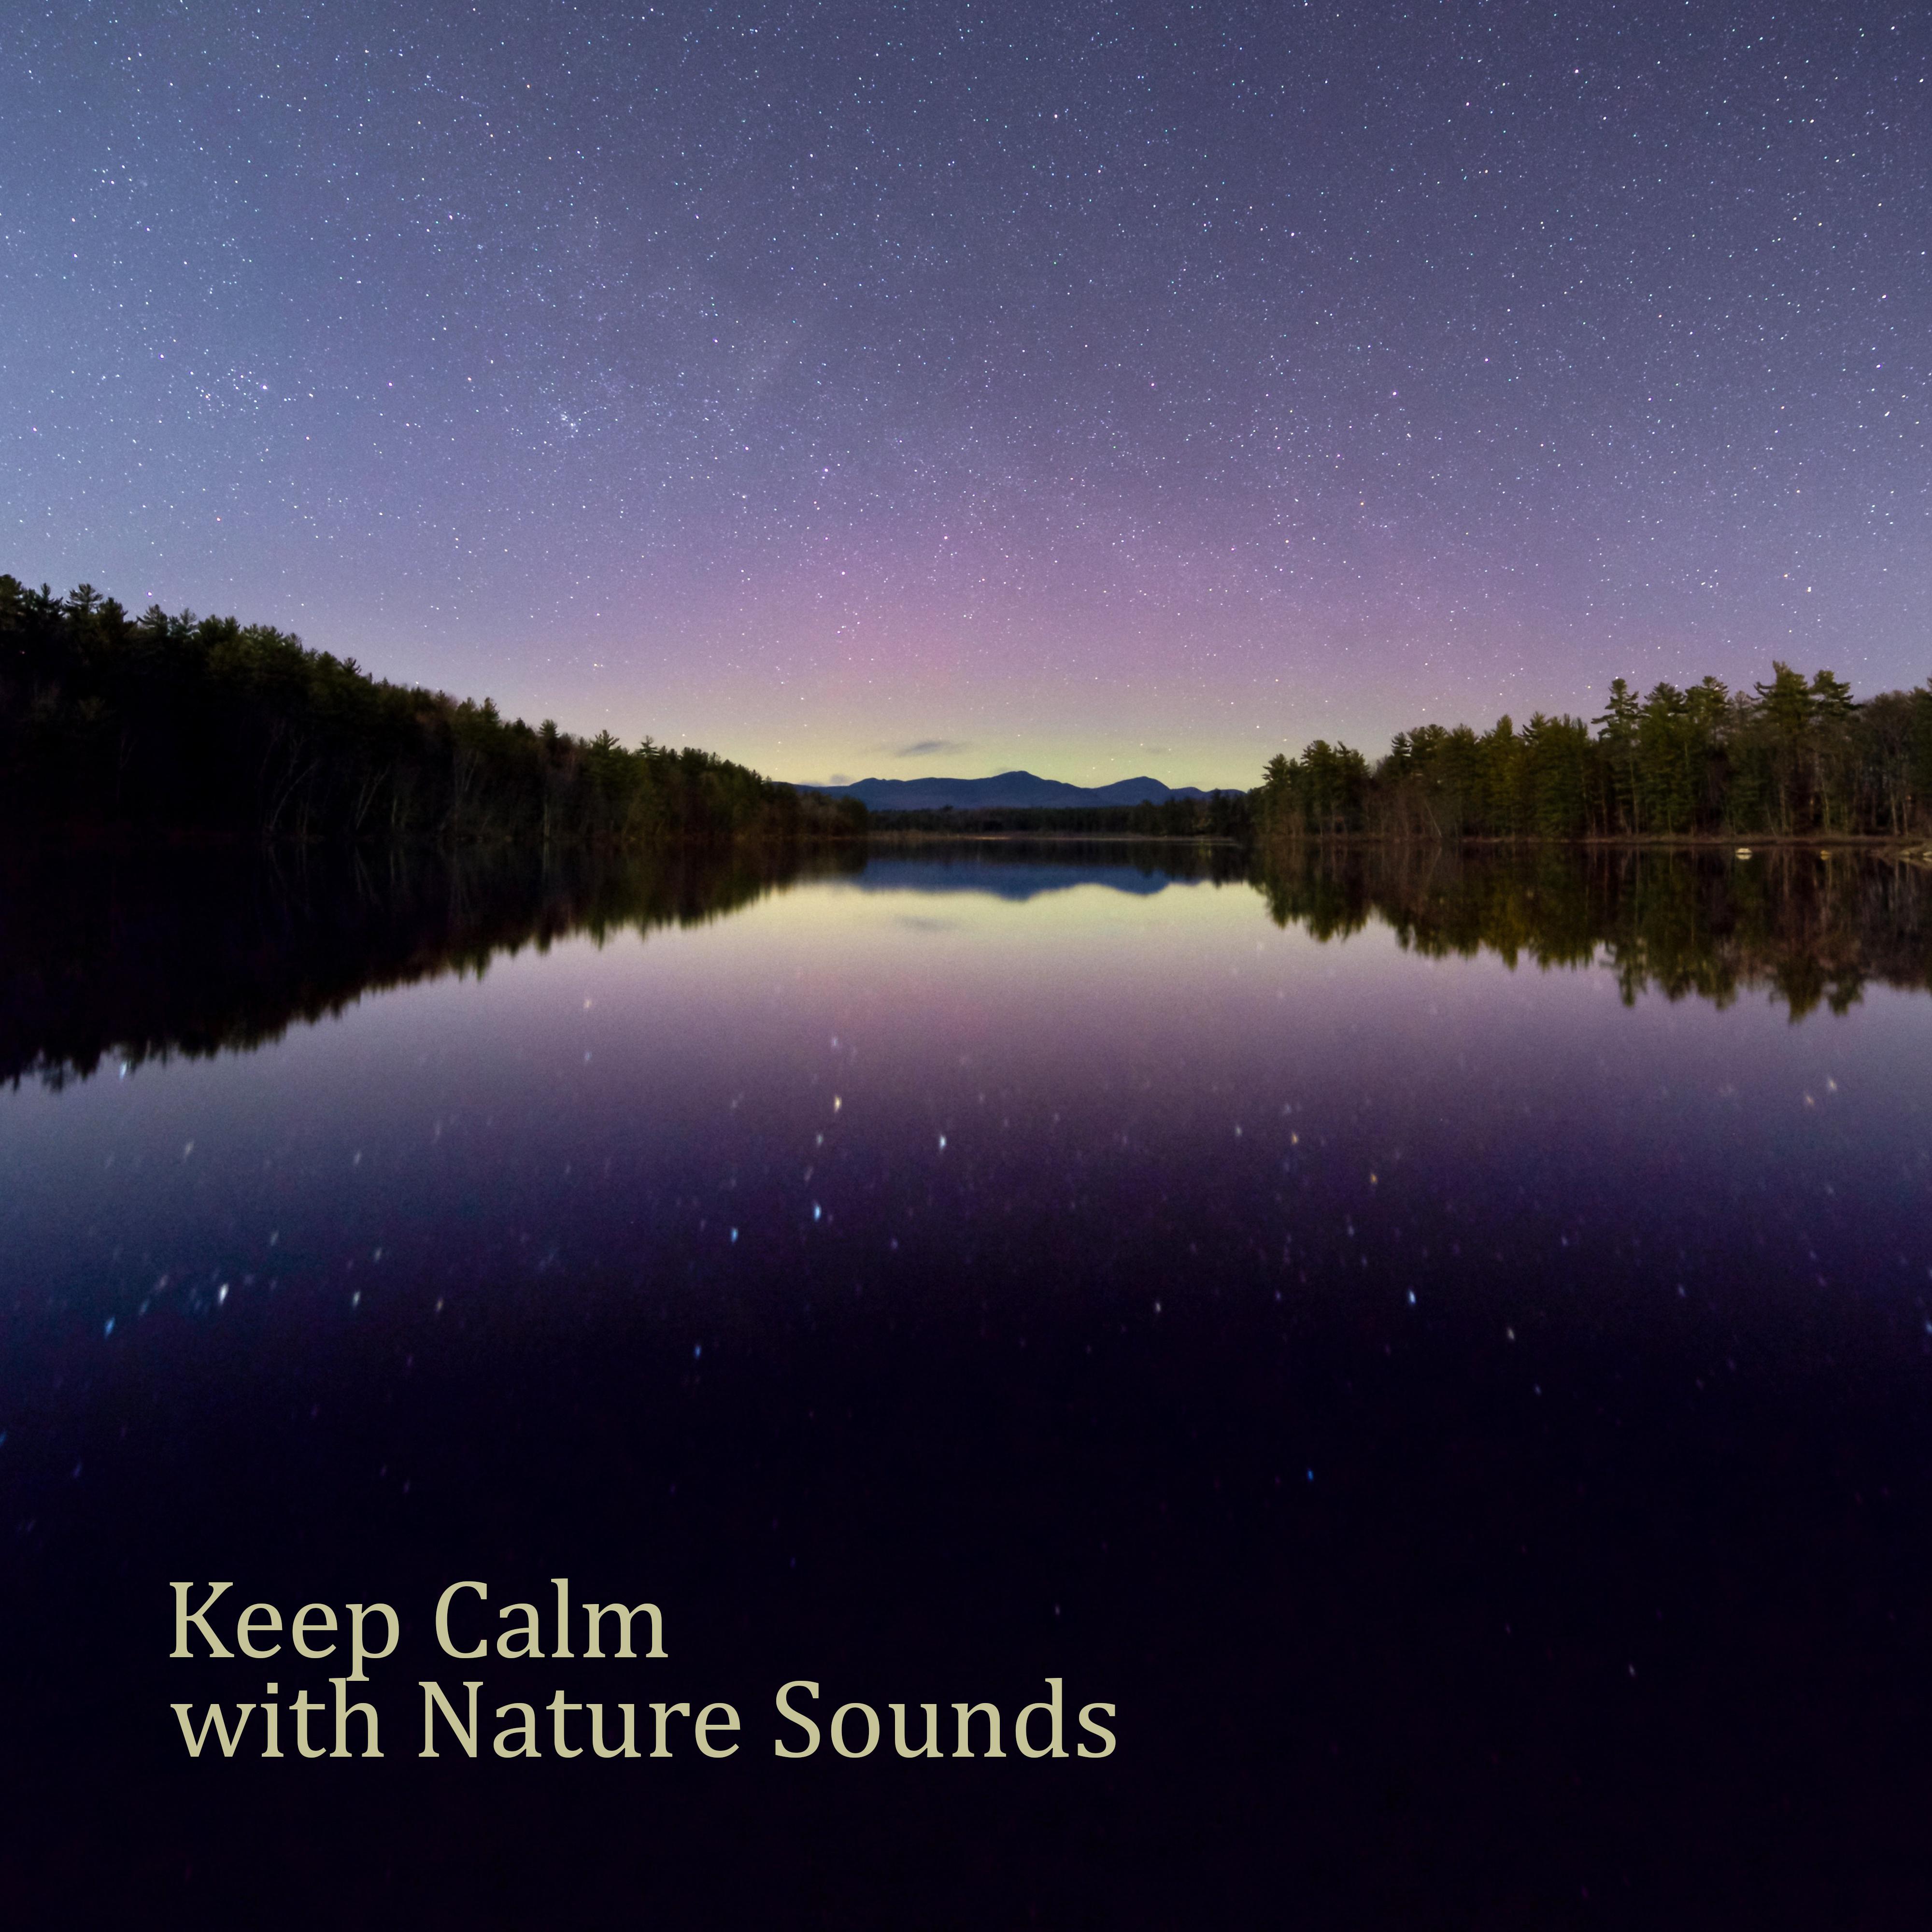 Keep Calm with Nature Sounds